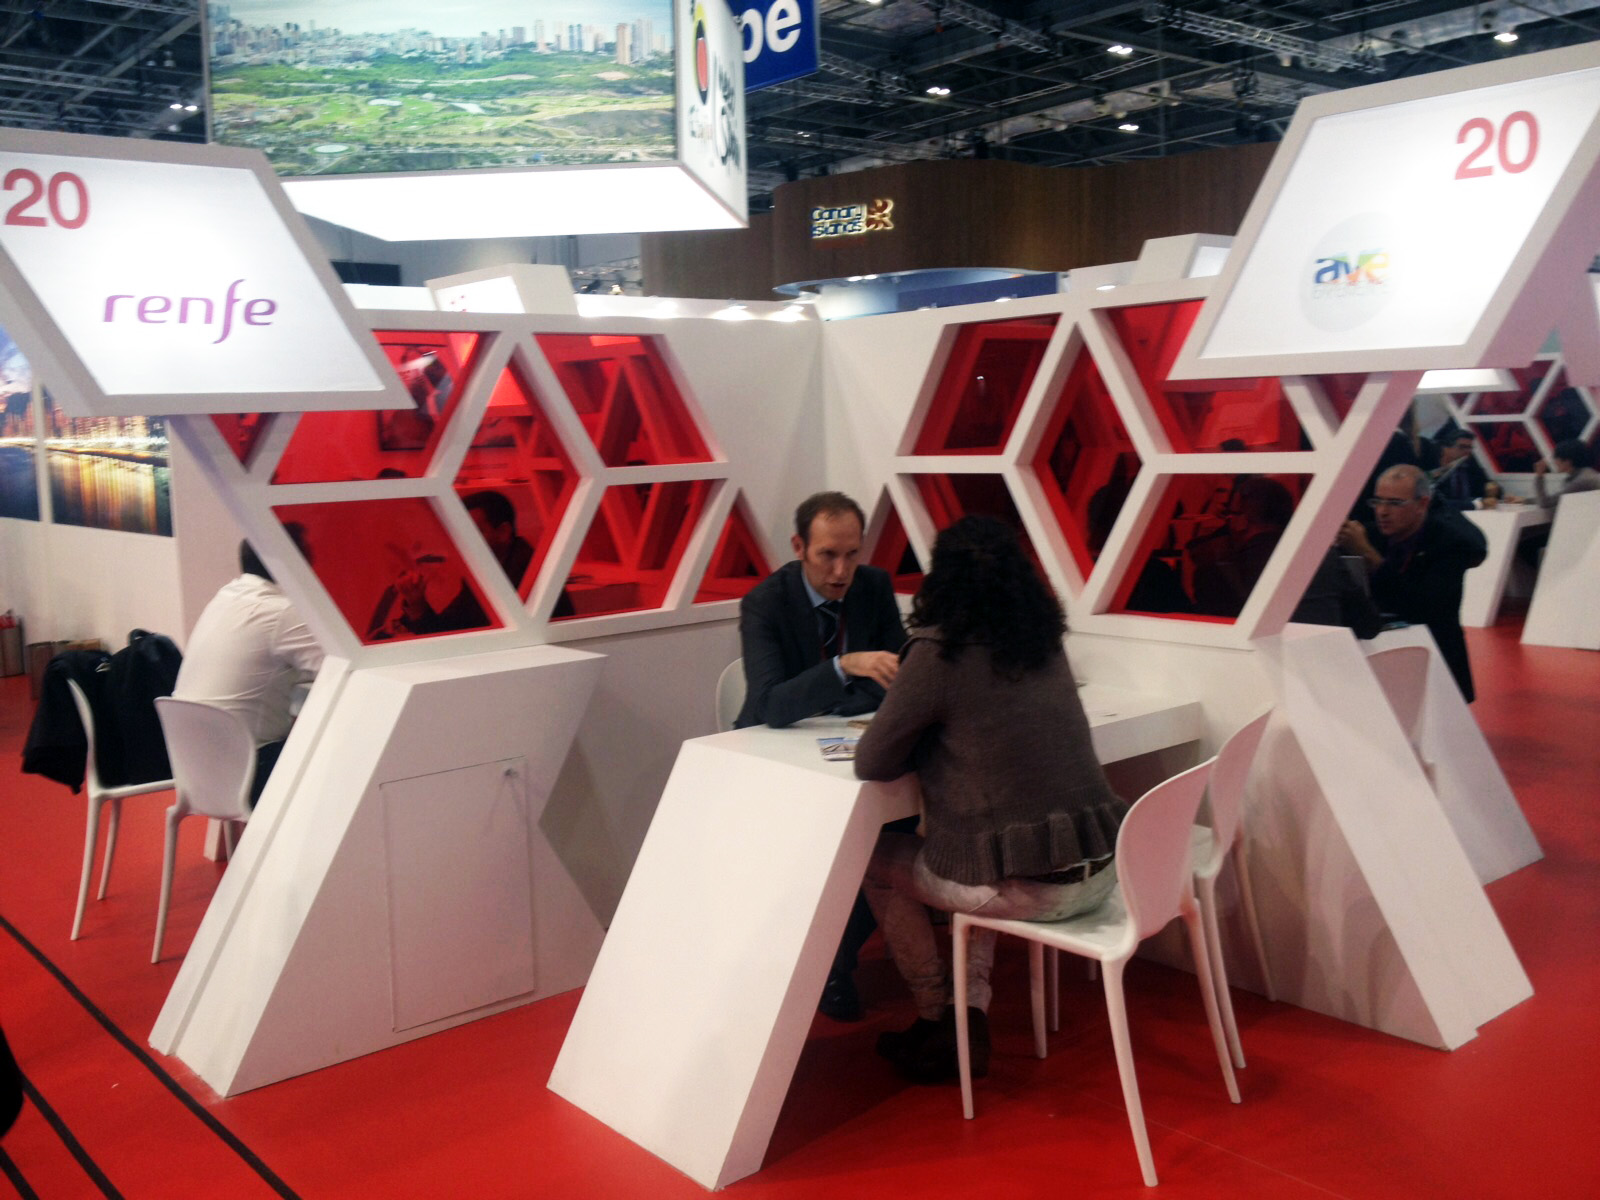 AVE Cities Network enhances its alternative to know Spain at the World Travel Market in London